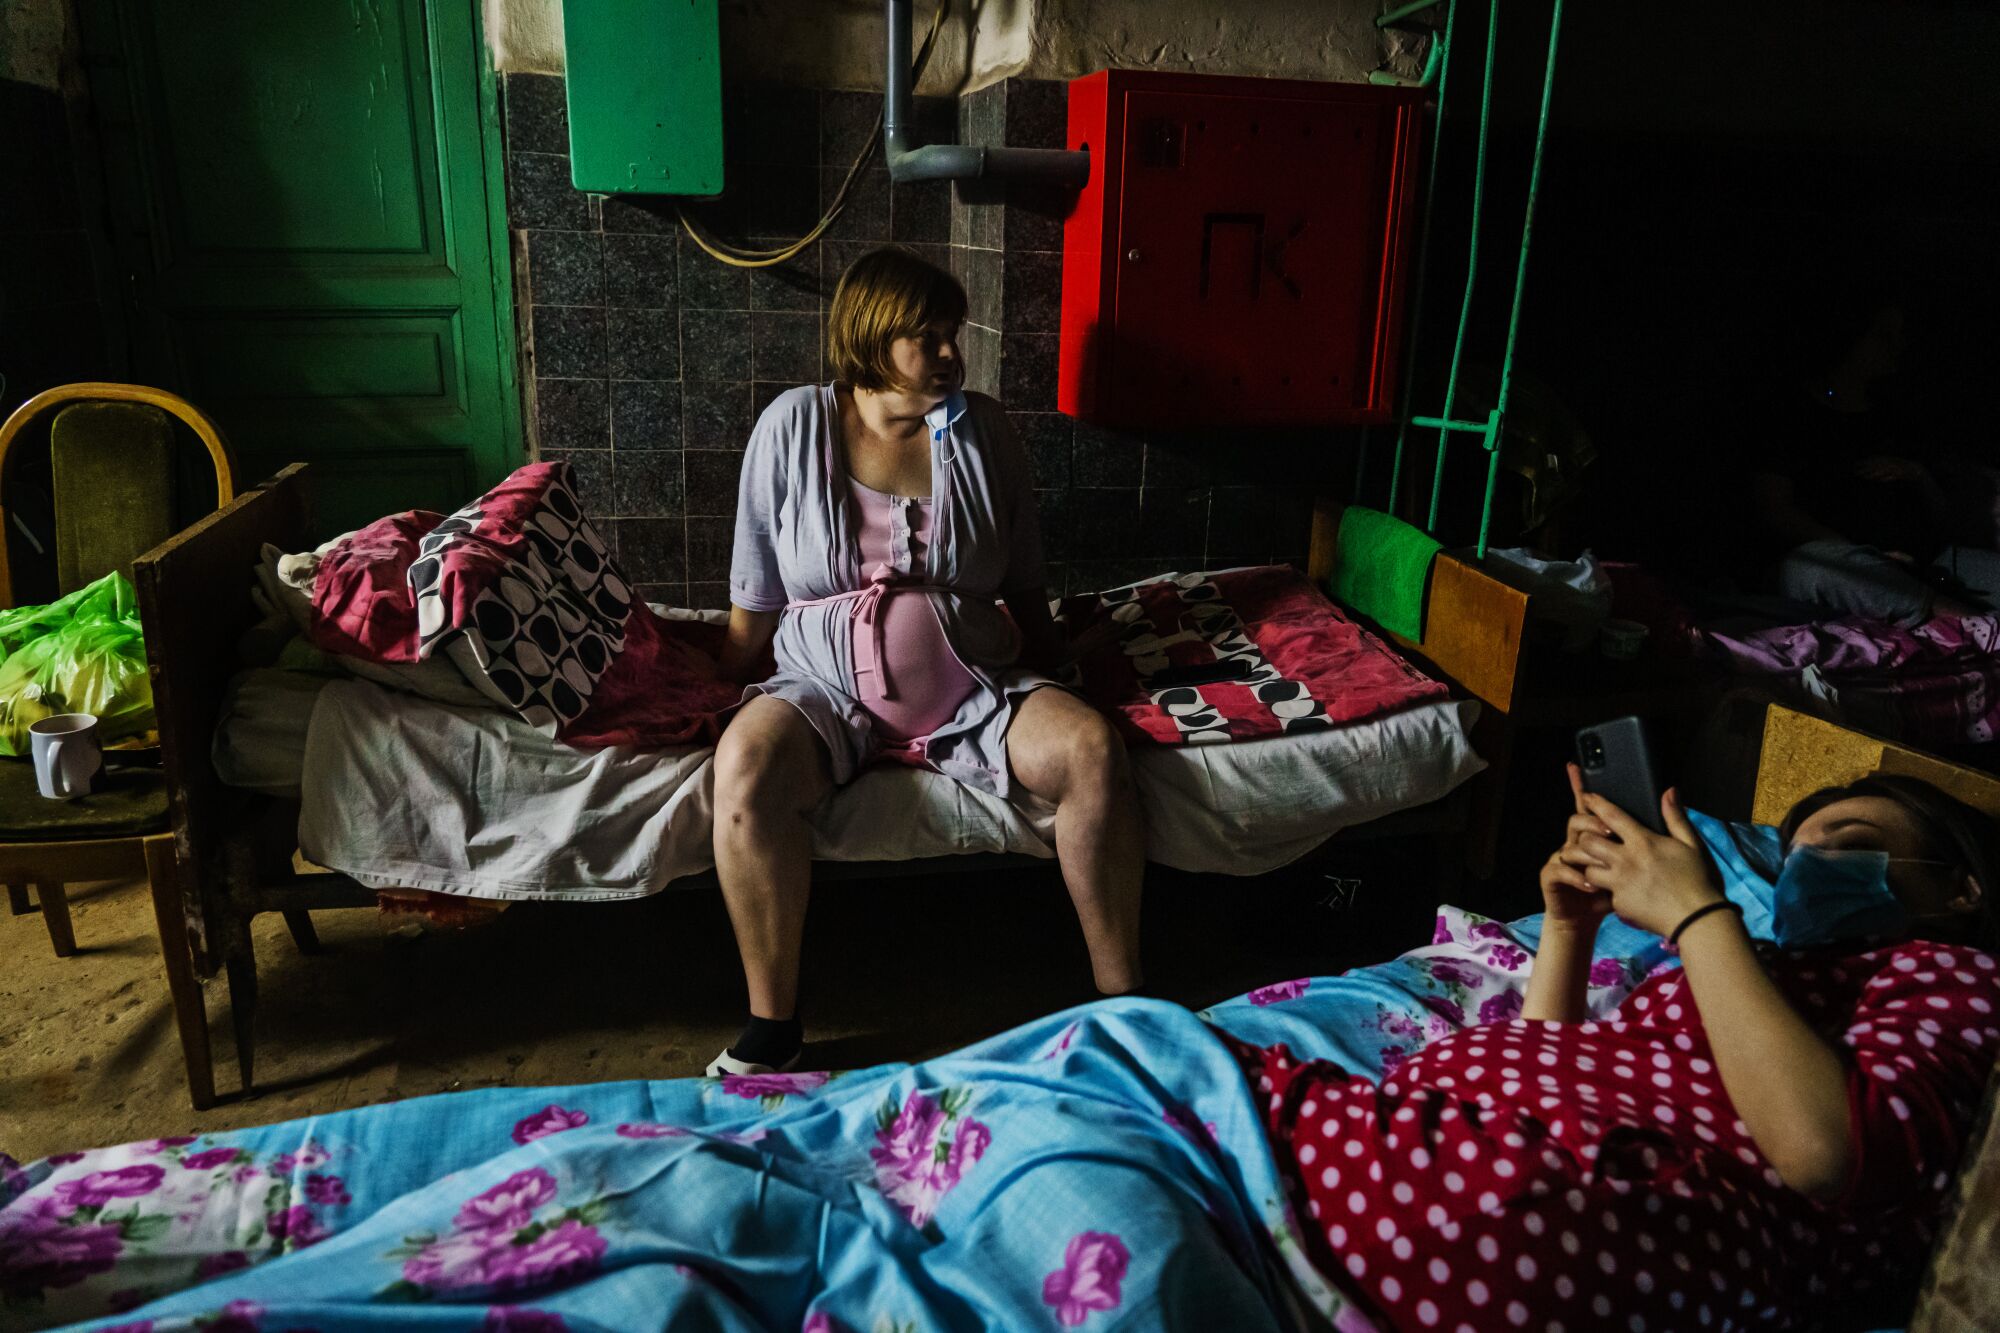 Pregnant women, one sitting up and one lying down looking at her phone, on beds in a dark shelter.